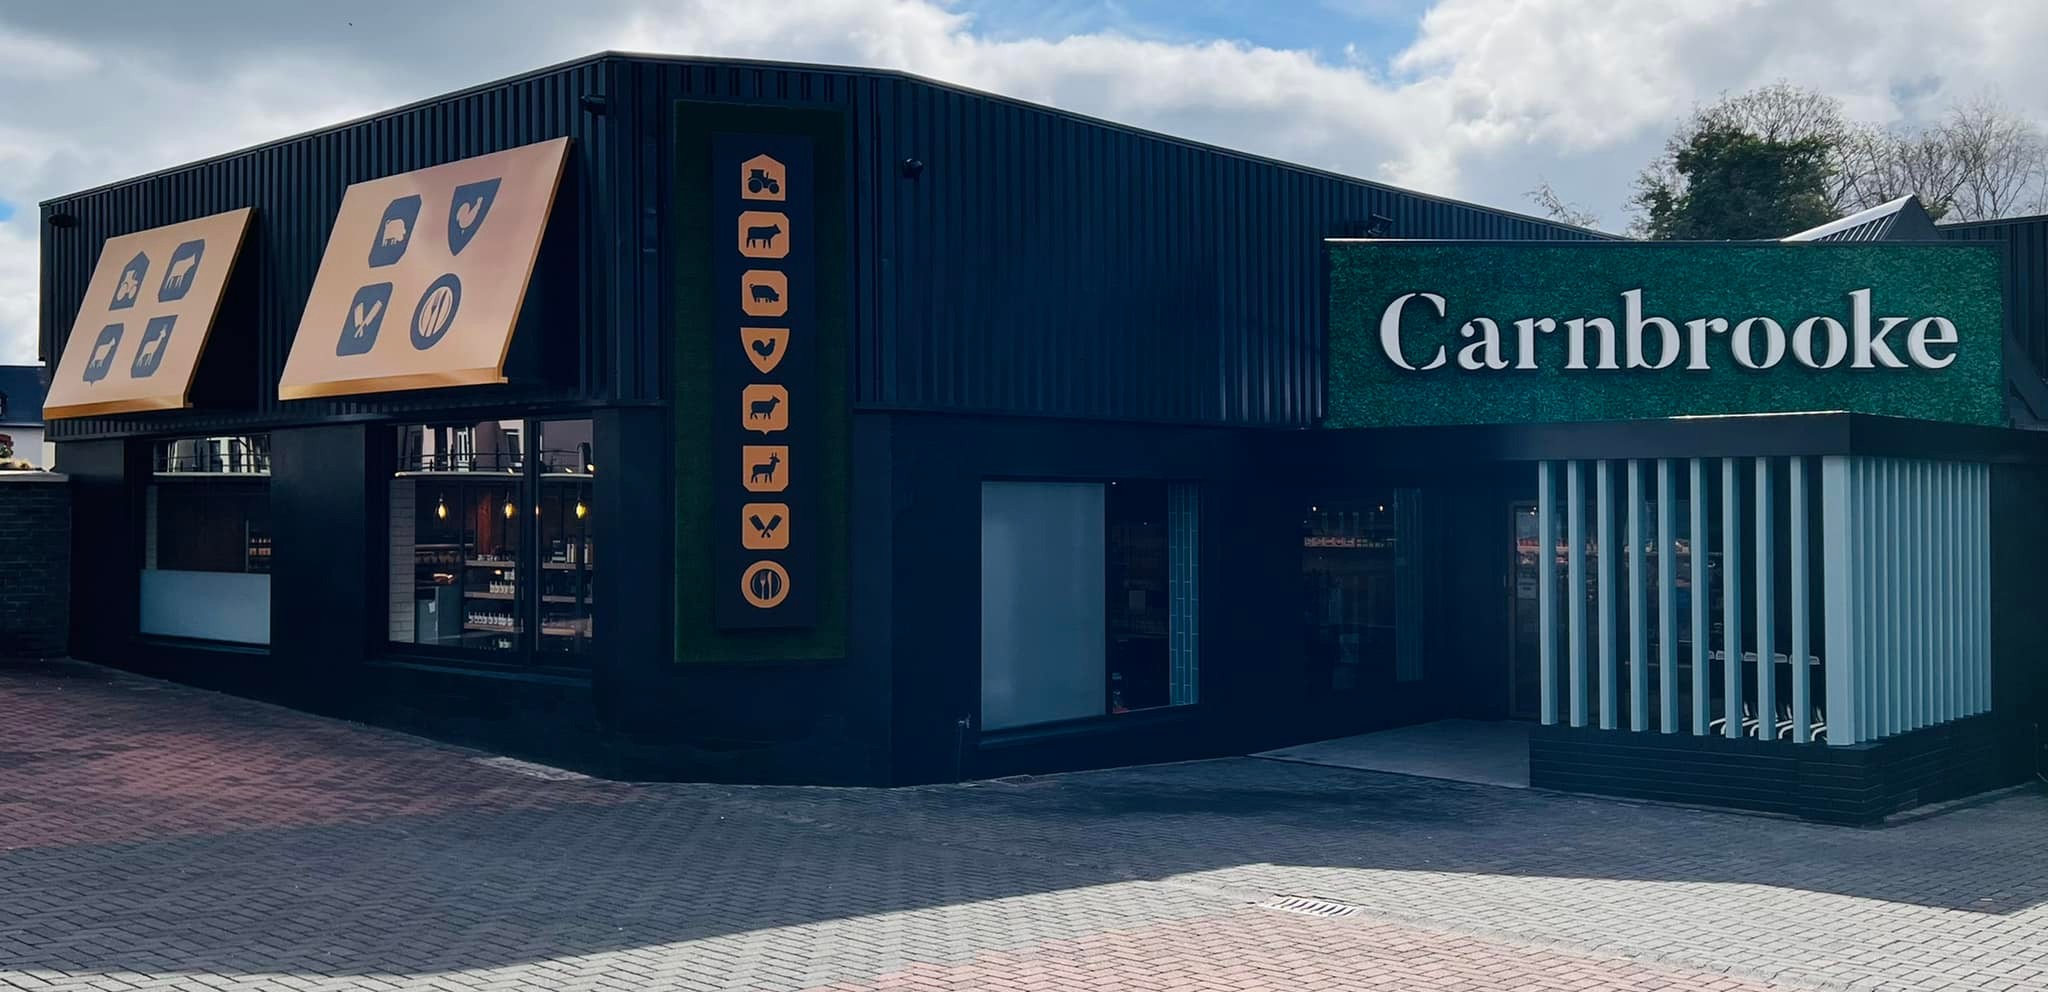 Continued growth at Carnbrooke as they expand their reach